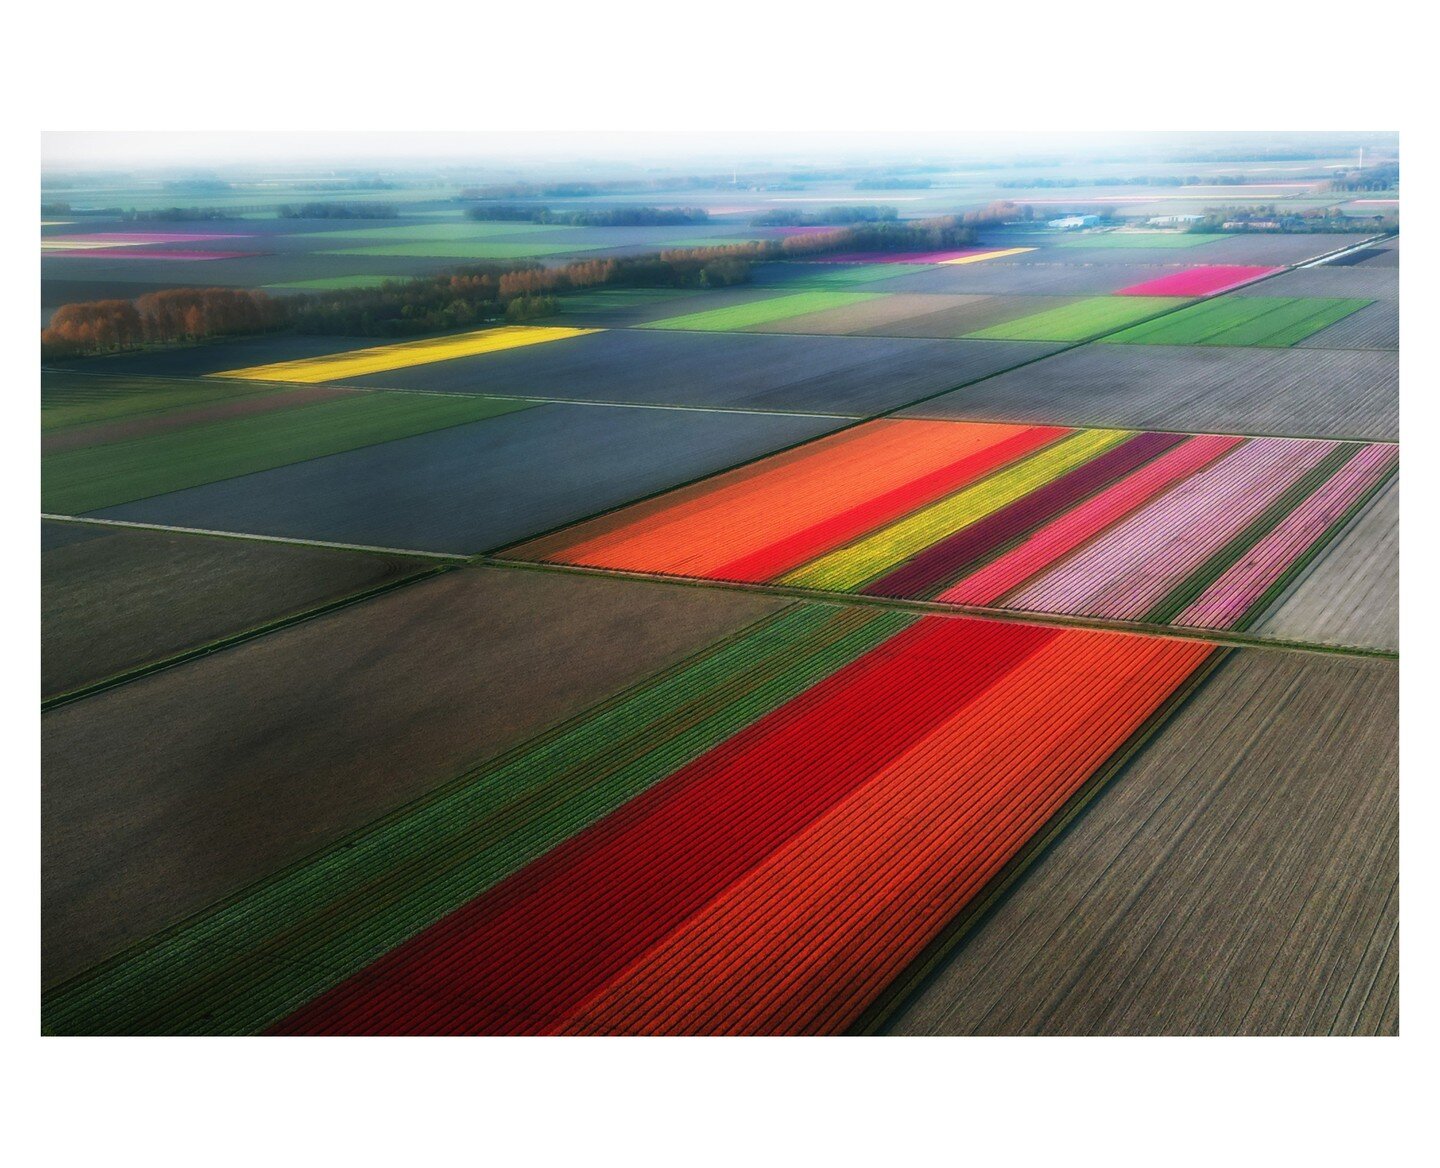 FRIESLAND ~ It was Sunday morning and I have a drone. And I am Dutch. So that meant: tulips.

#dutchtulips #dutch #tulips #tulip #tulipseason #tulipphotography #minimalist #drone #dronephotography #dronelife #tulpenroute #tulpenrouteflevoland #mavicp